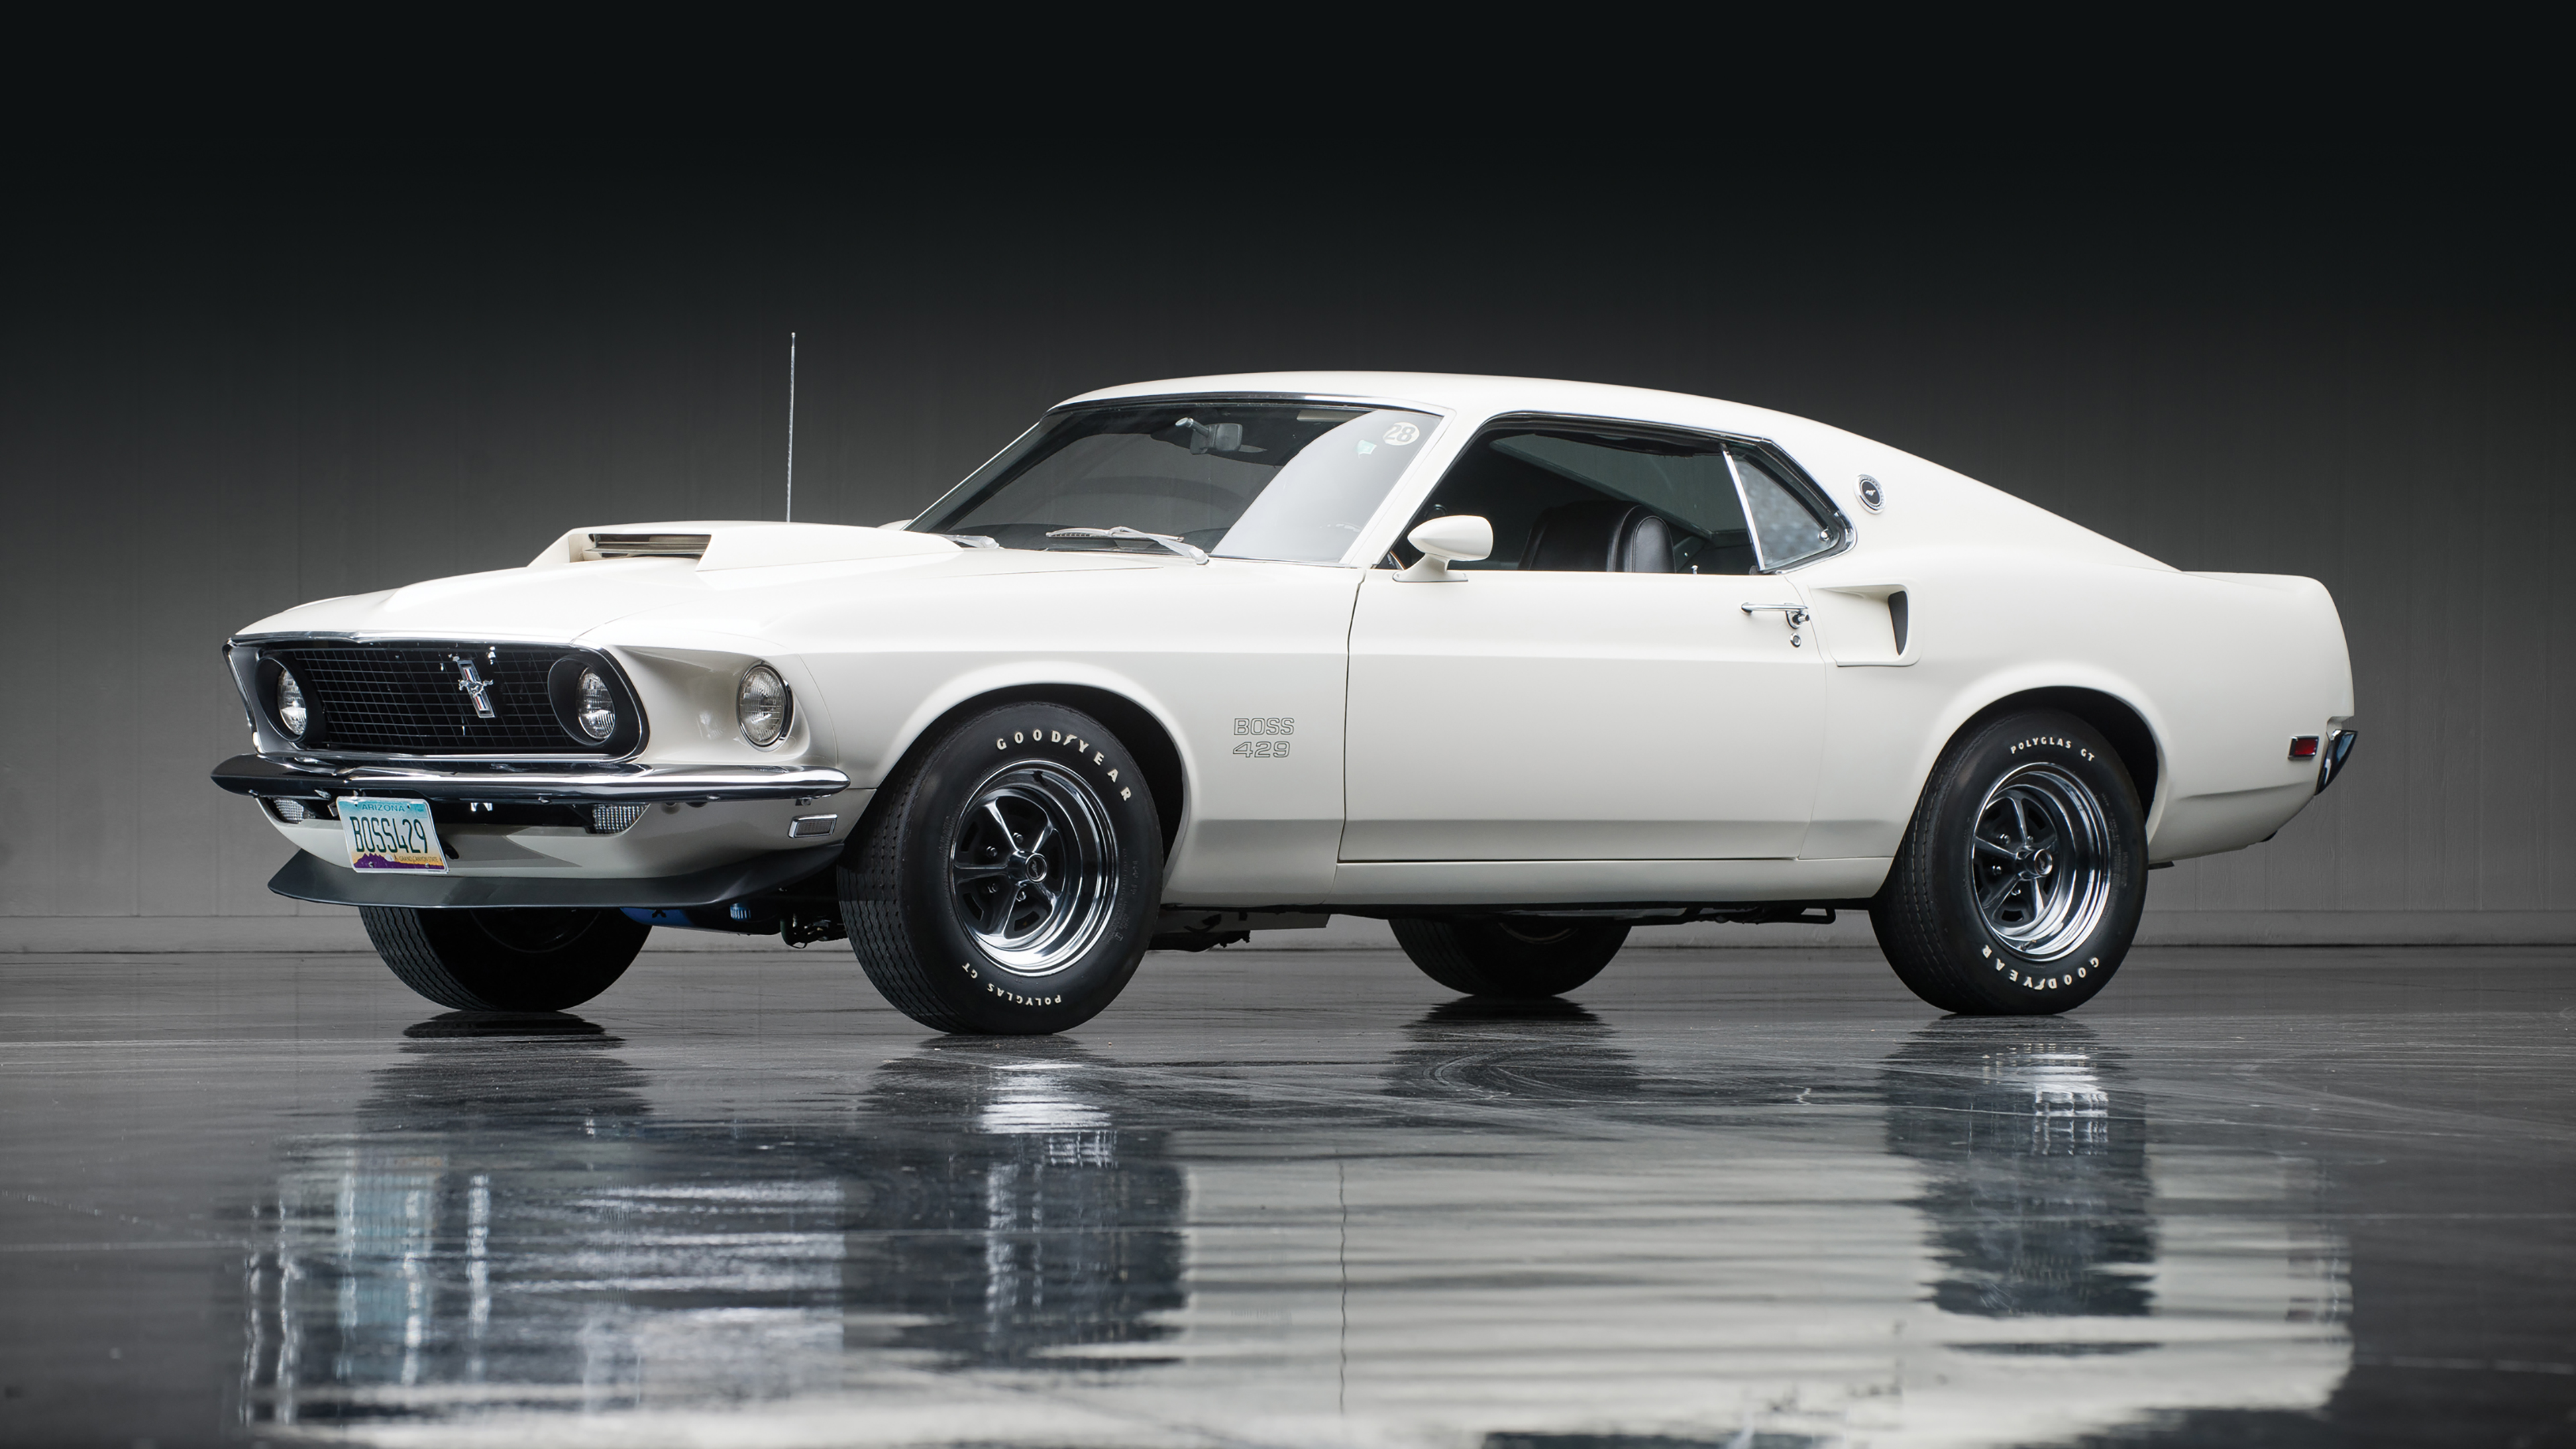 Download wallpaper 240x320 black 1969 ford mustang boss 429 old mobile  cell phone smartphone 240x320 hd image background 9823